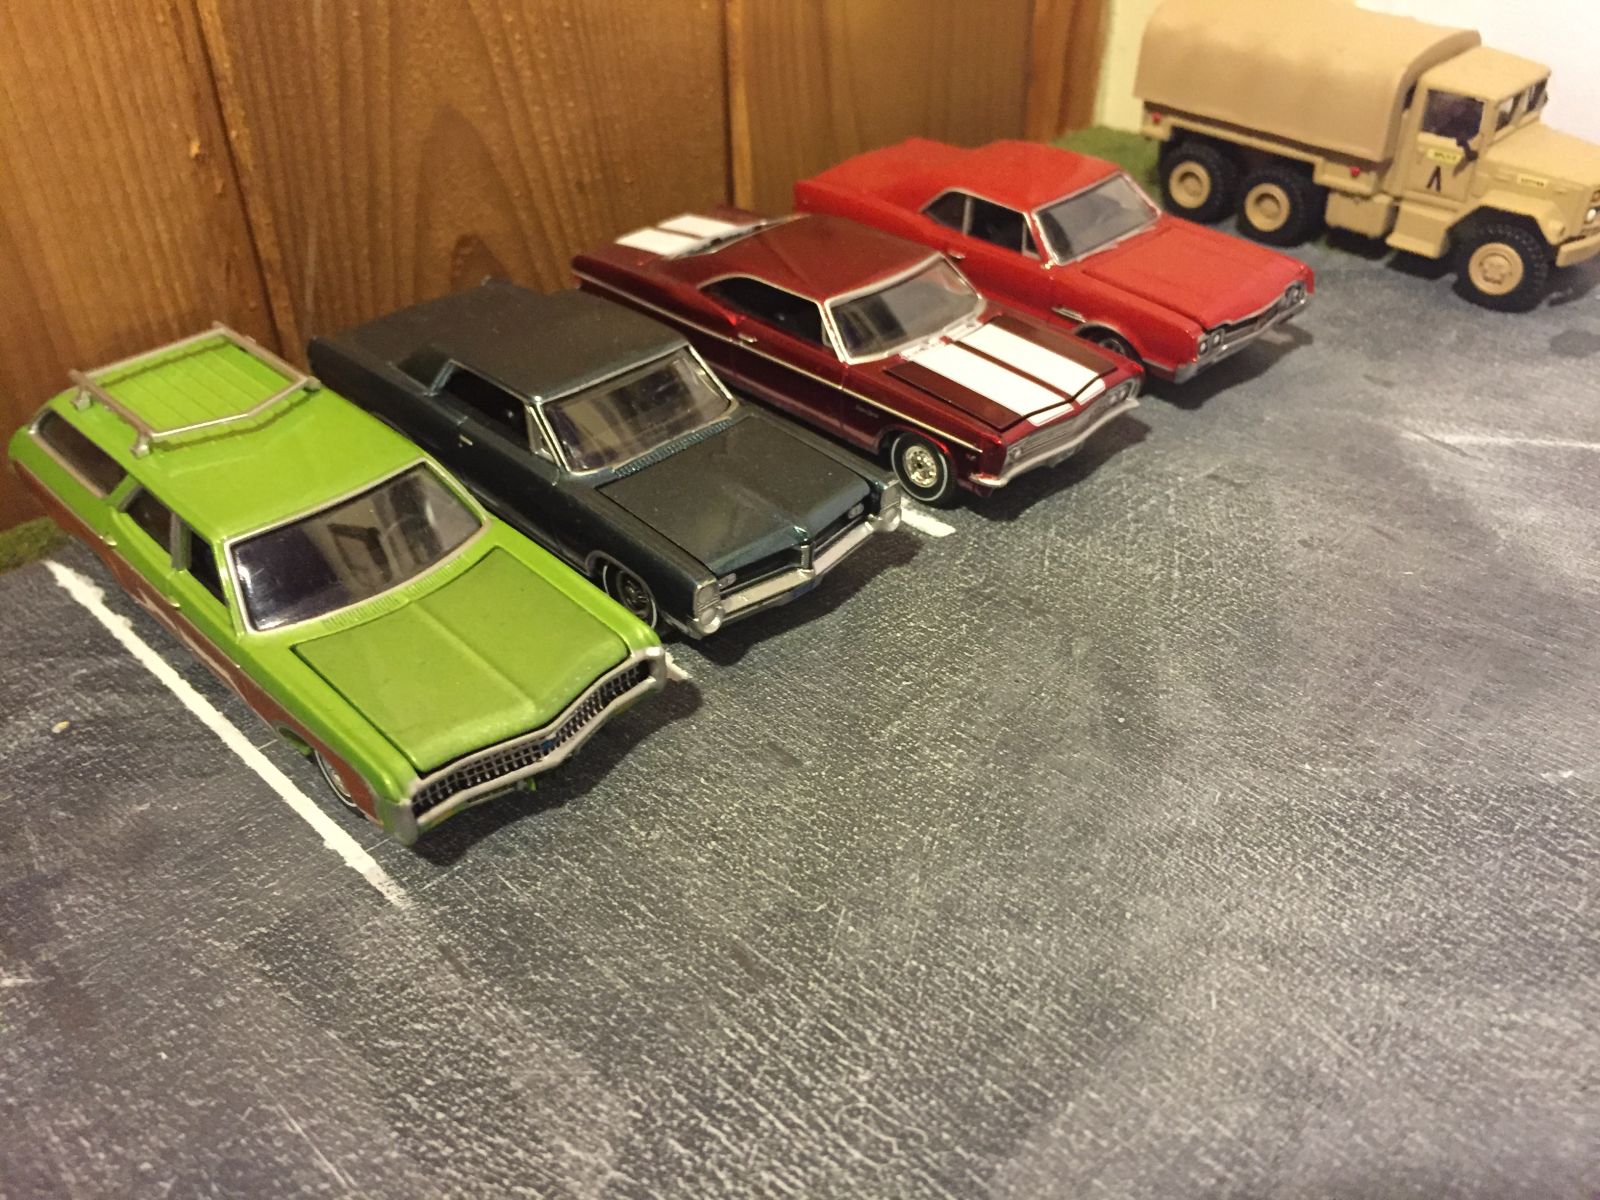 Lately I’ve been loving the older GM cars, the boat ones. I need to get more! :p